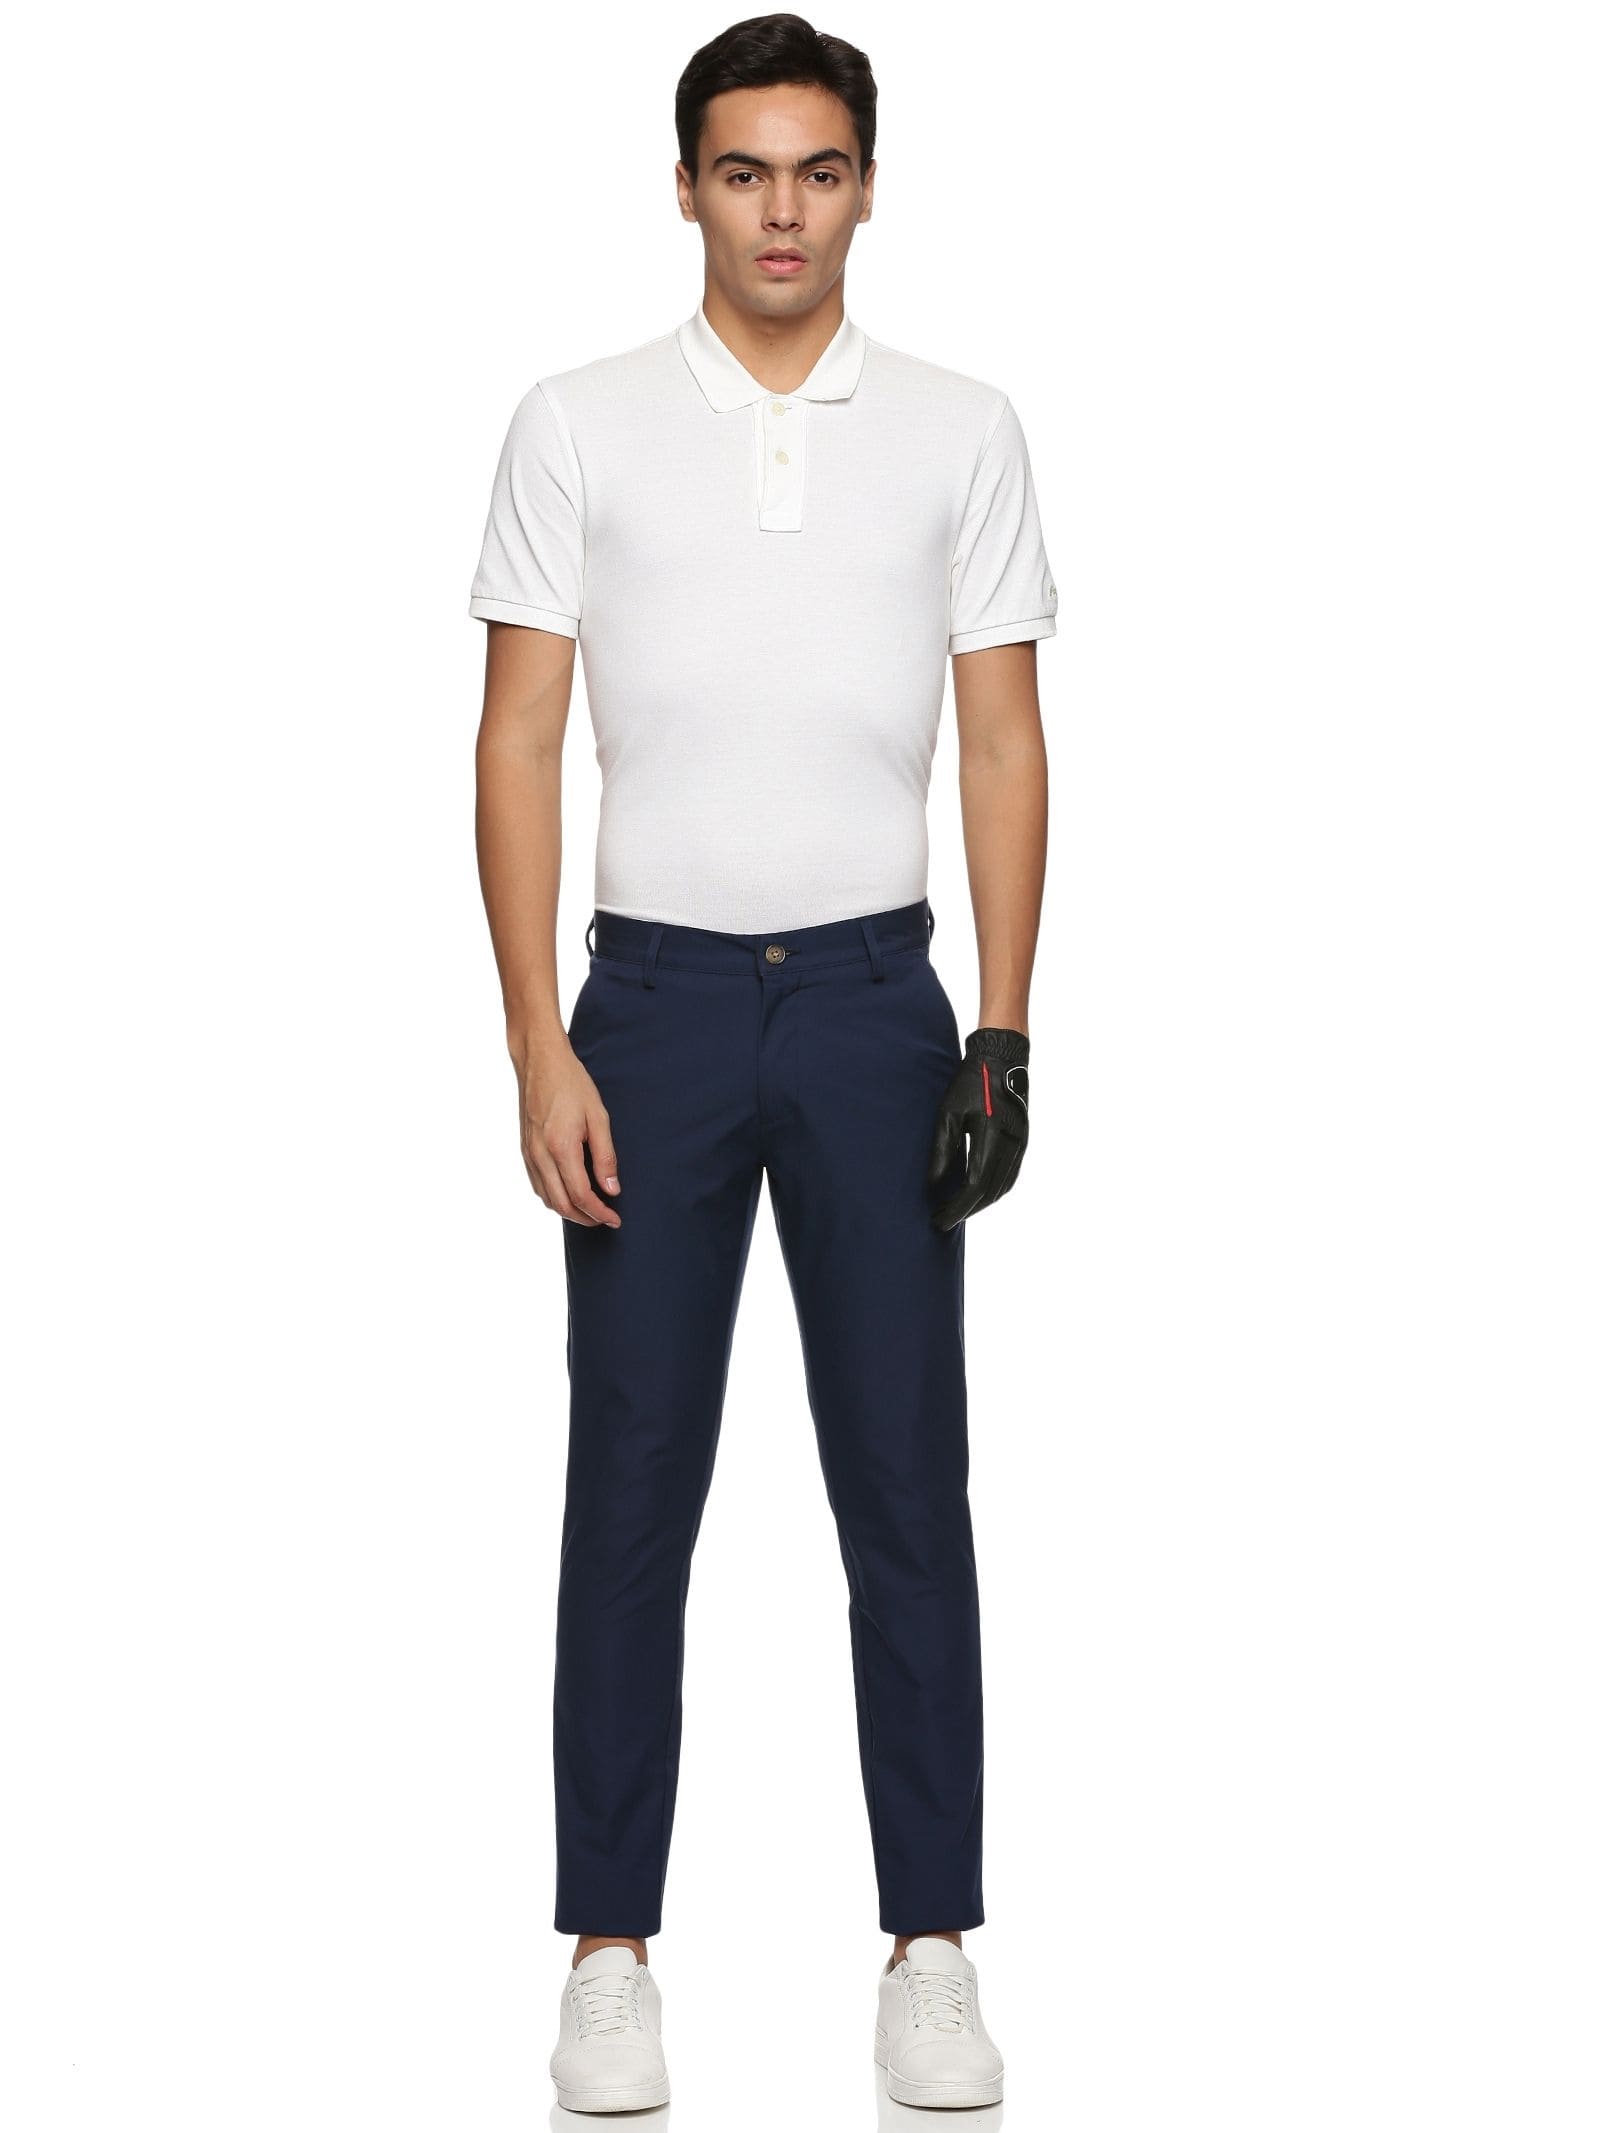 In Motion Golf Pant Light Grey  New Dimensions Active  Golf Trousers